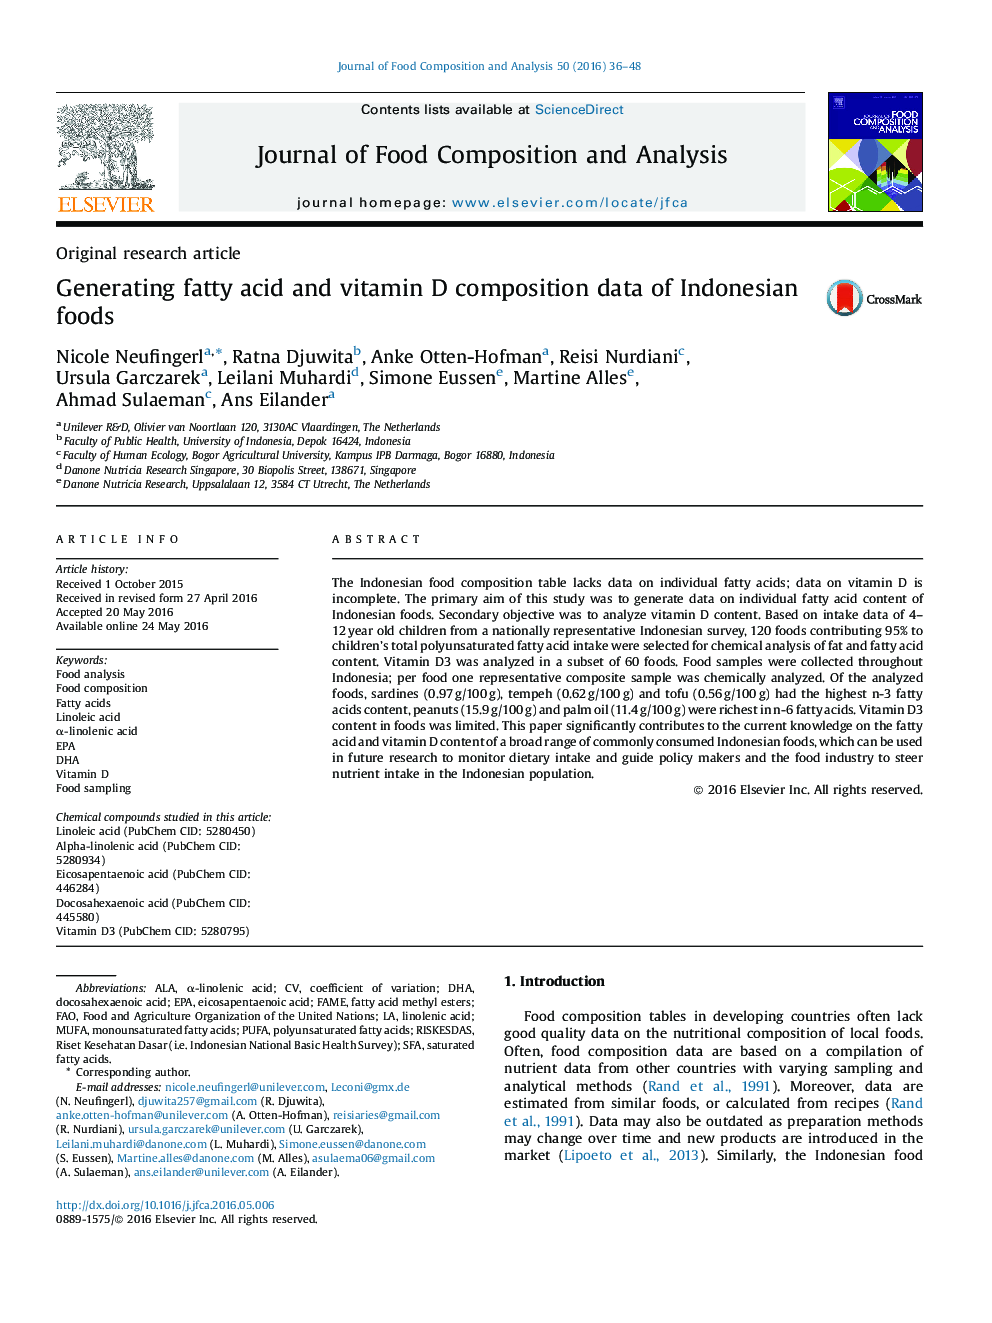 Generating fatty acid and vitamin D composition data of Indonesian foods